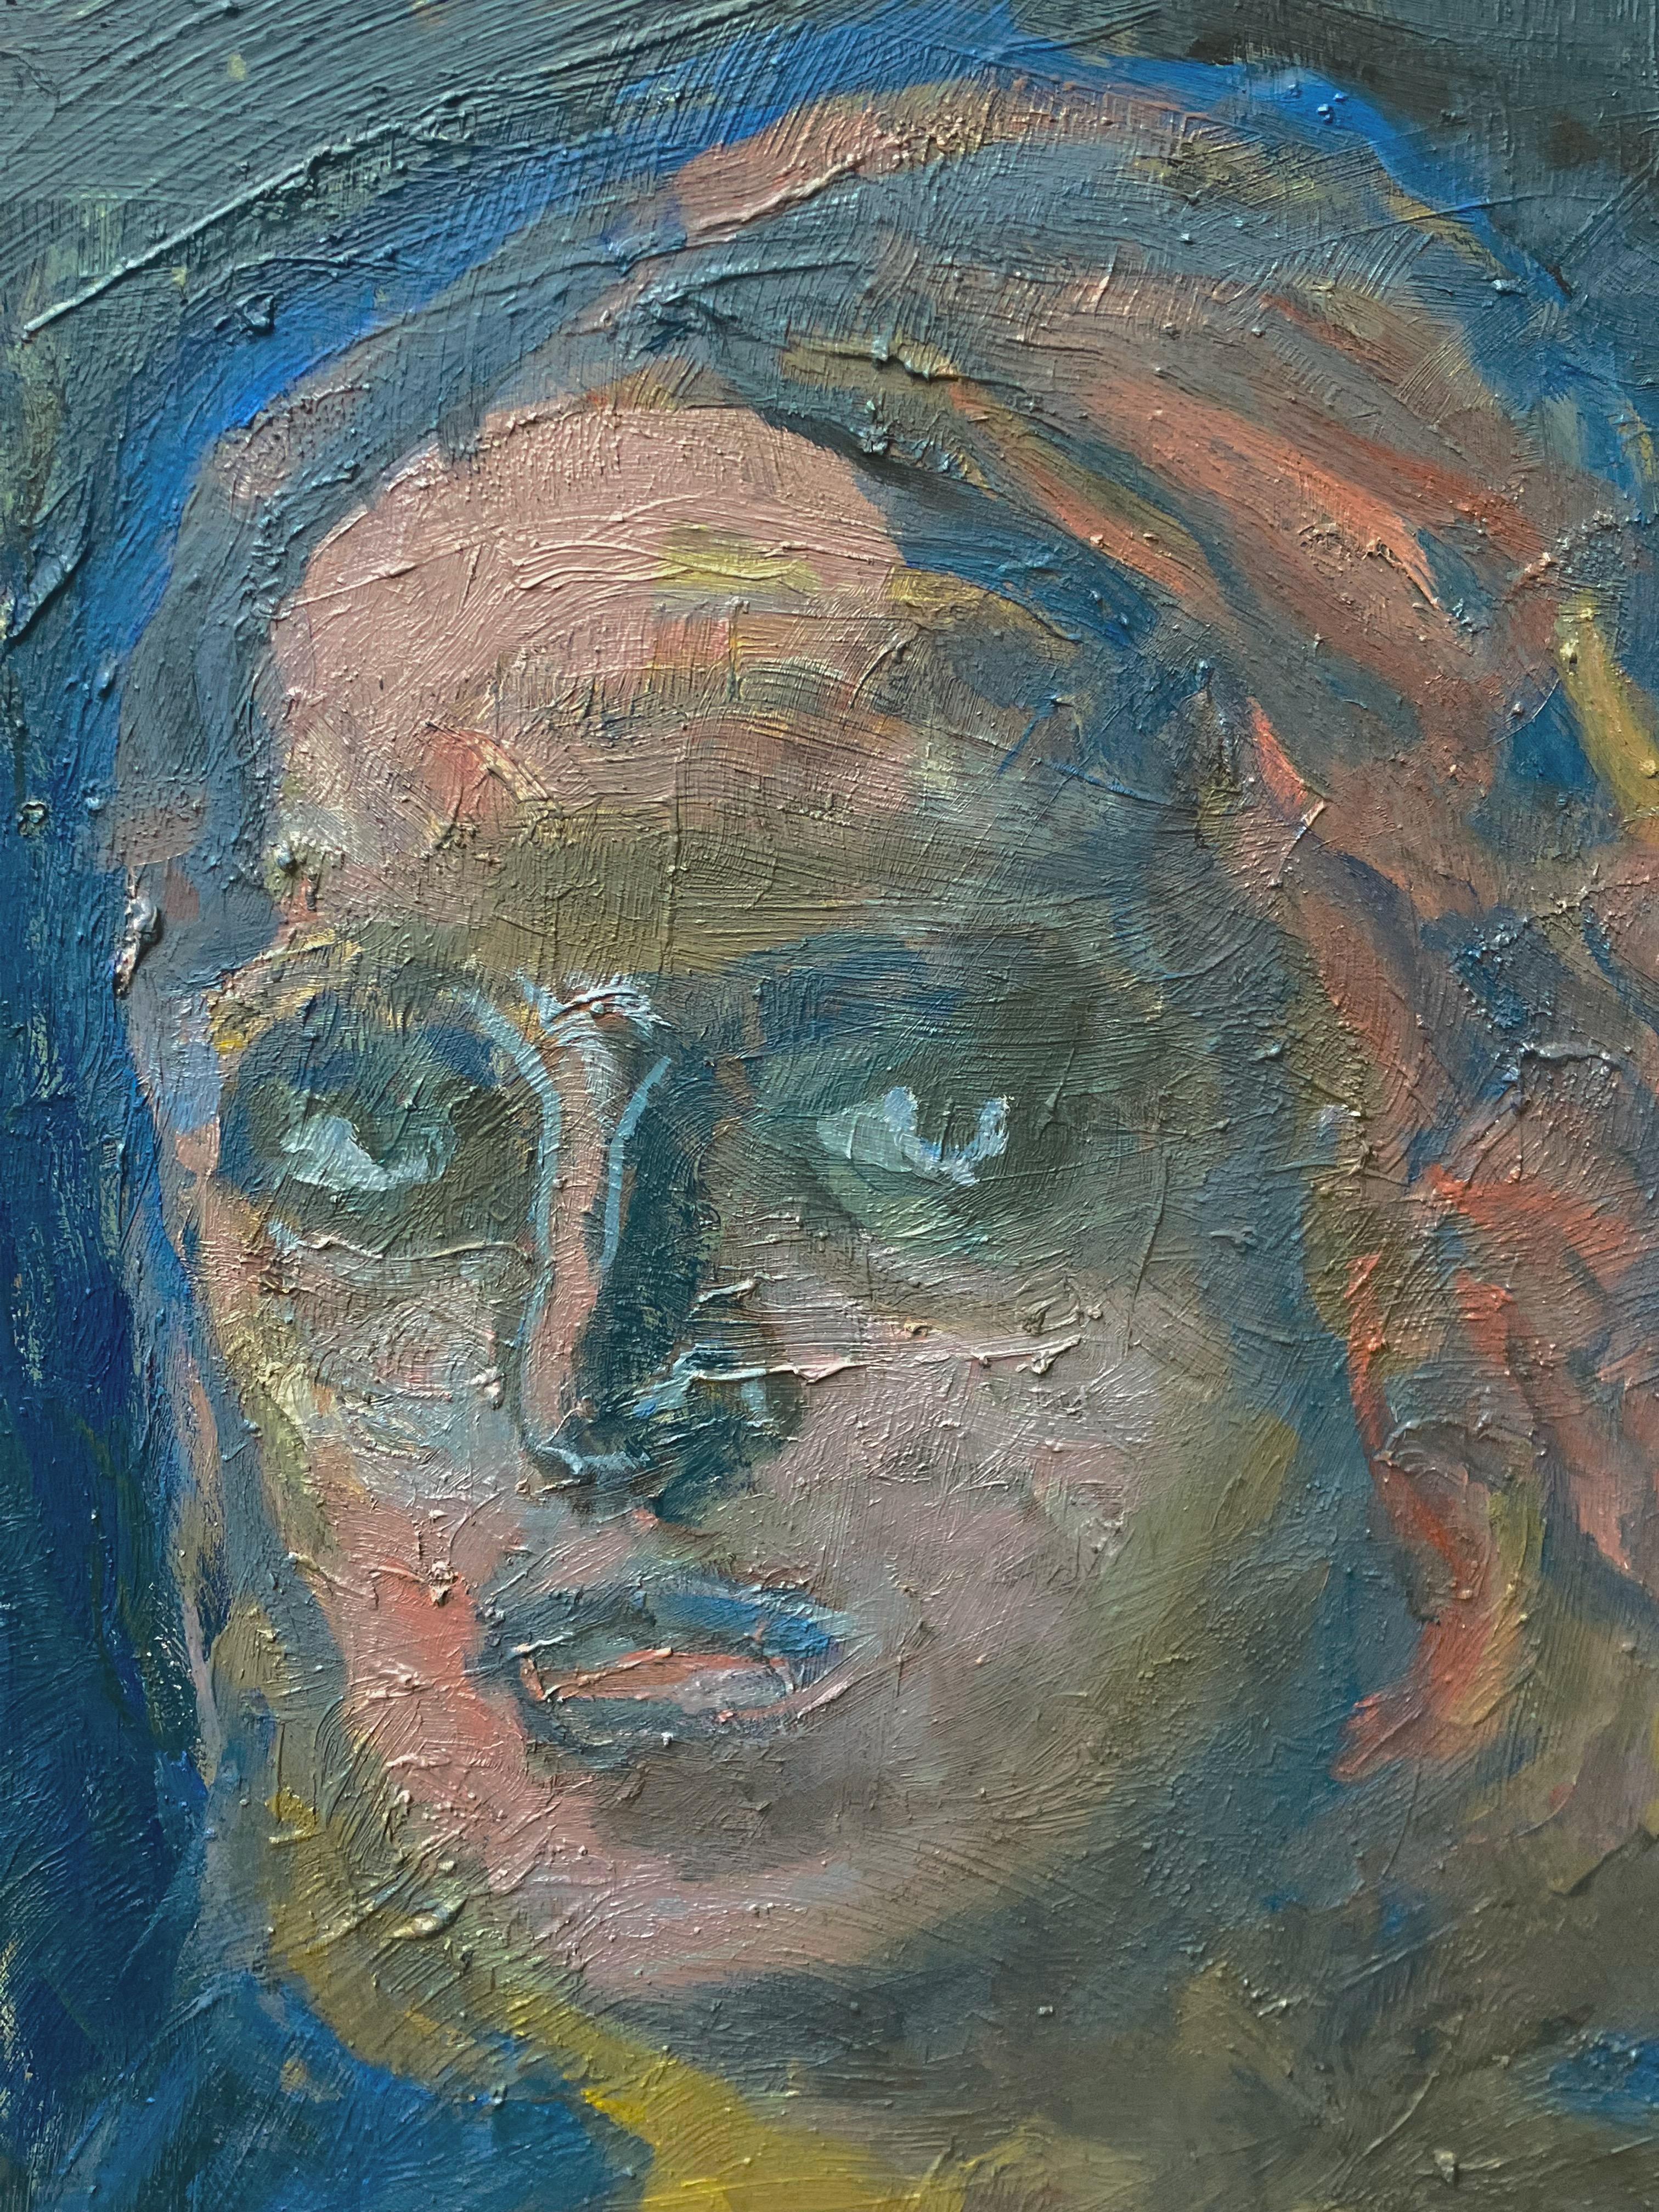 This expressive, figurative portrait is by Cliffton Peacock (1953-). The painting measures 40 x 34 inches (42 x 36 inches framed.) It is composed of oil on canvas. The painting is signed and dated (1991) on the reverse. As well, there is a gallery